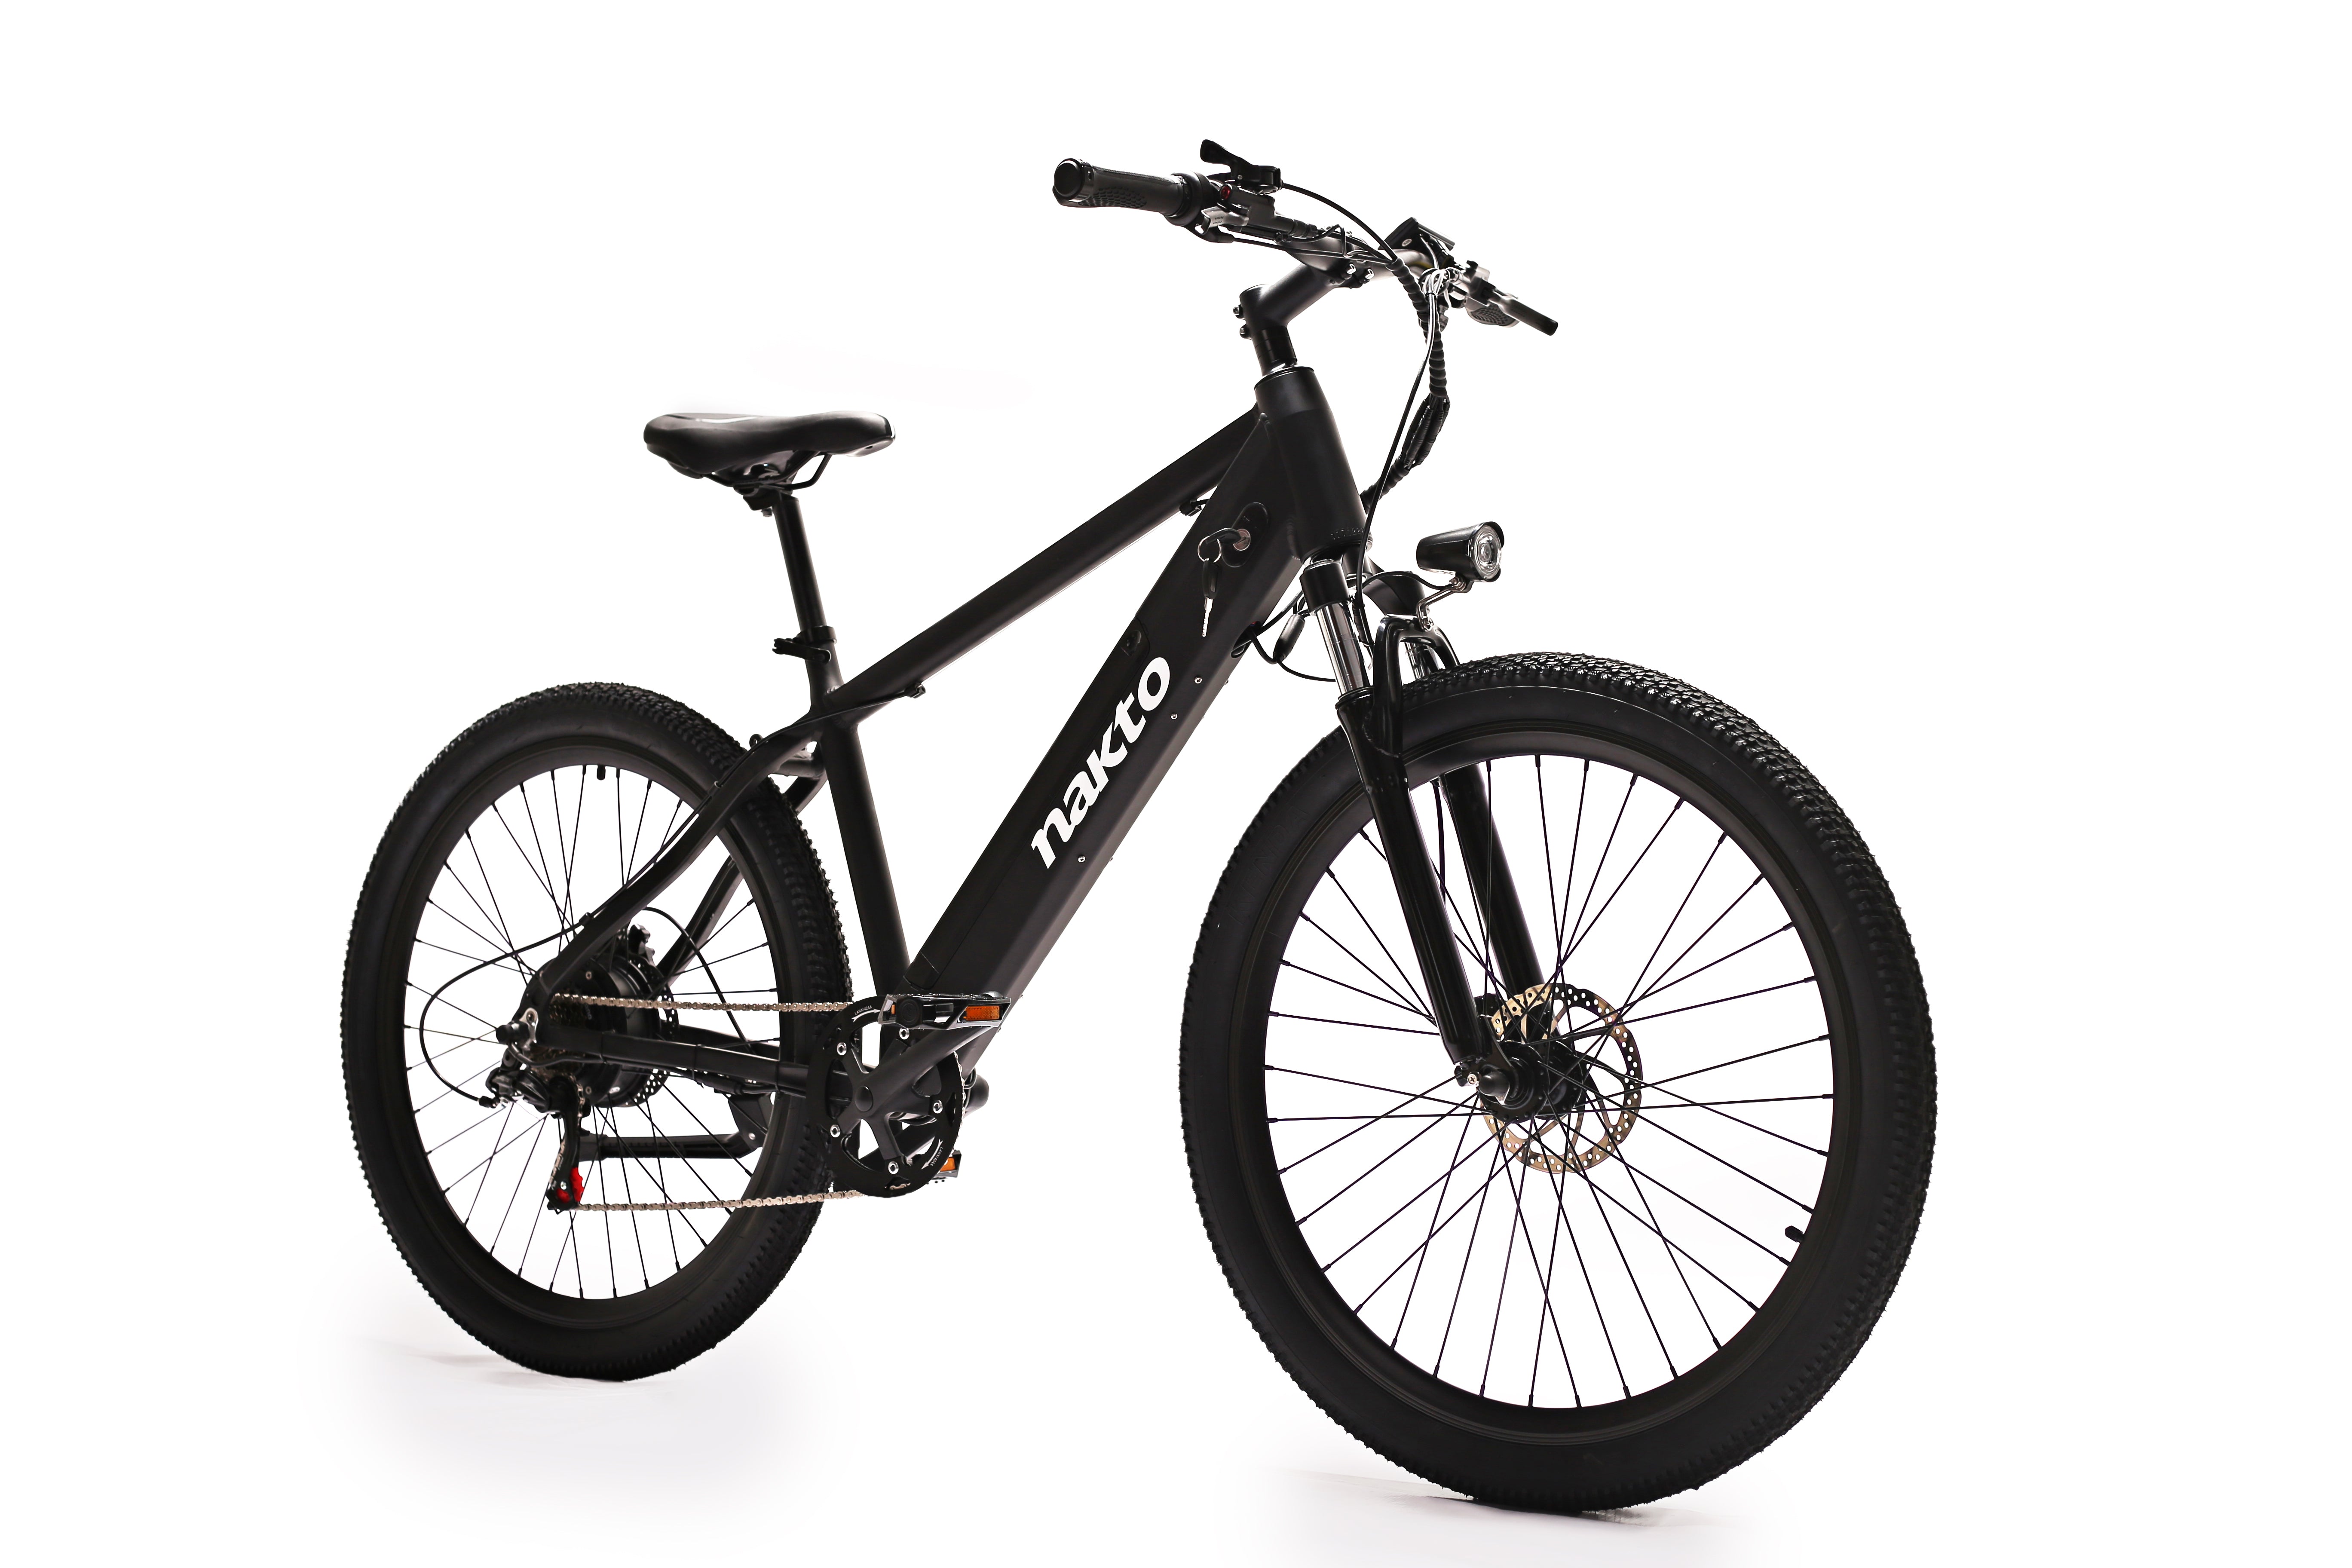 Ranger All-Terrain Electric Bicycle